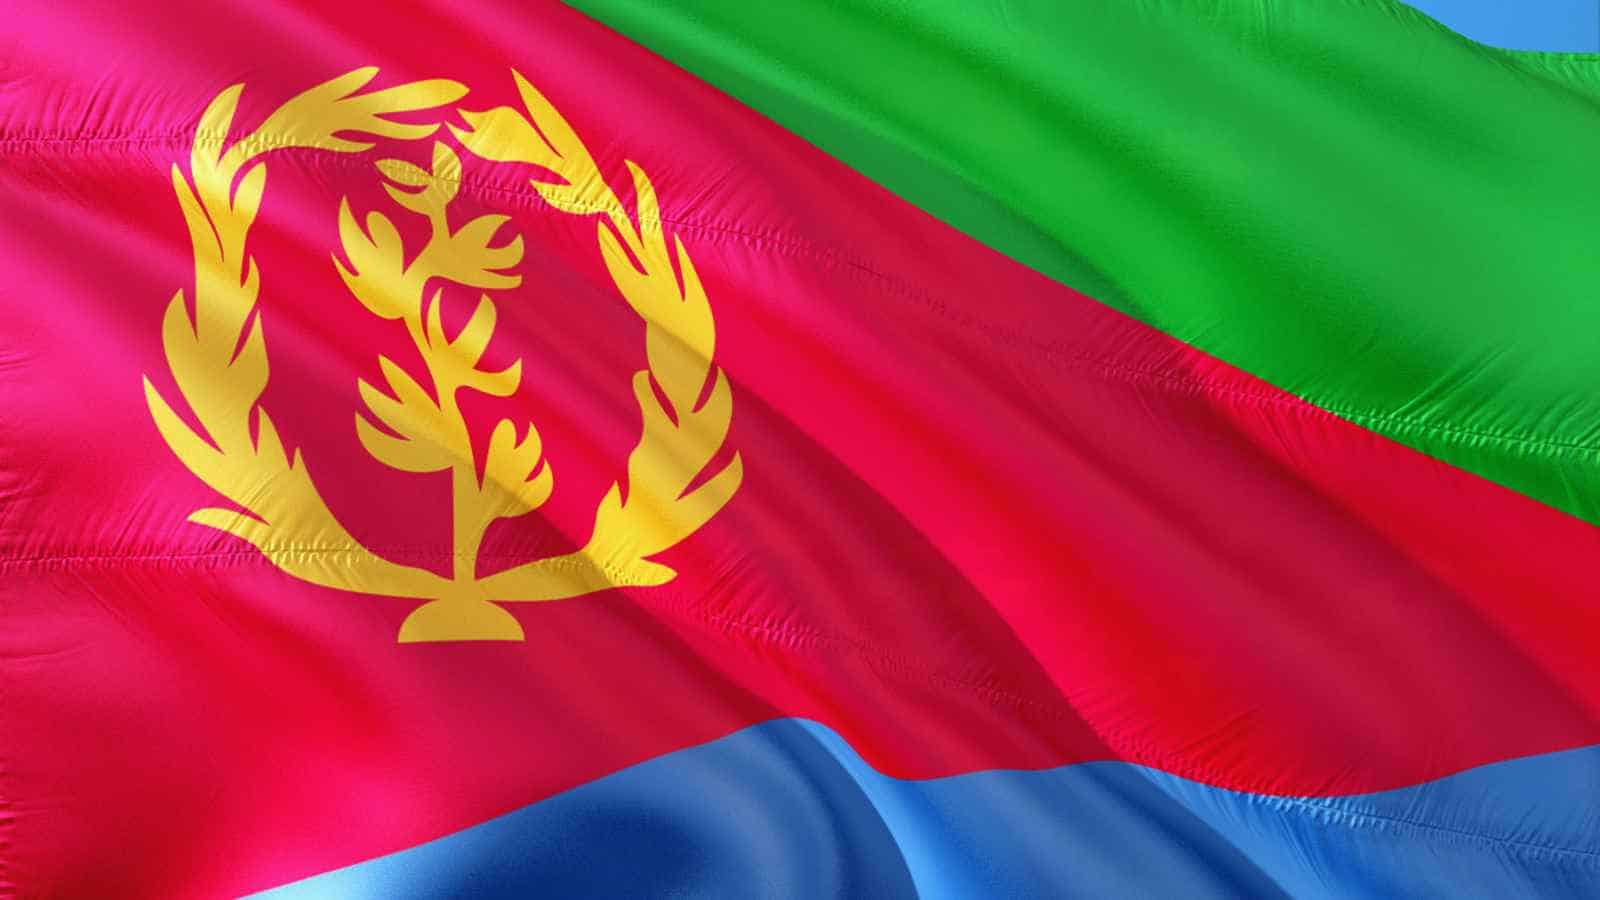 <p>The African nation of Eritrea might not be a household name, but its restrictive visa policies have drawn comparisons to the infamous regime of North Korea. Visitors can only enter through organized tours or with an official invitation, and even then, they must surrender their passports for their stay.</p><p>While this may seem extreme, Eritrea’s complex history and current political climate make it a challenging destination for outsiders. But those who journey are rewarded with stunning beaches, vibrant markets, and a unique blend of African and Middle Eastern cultures.</p>